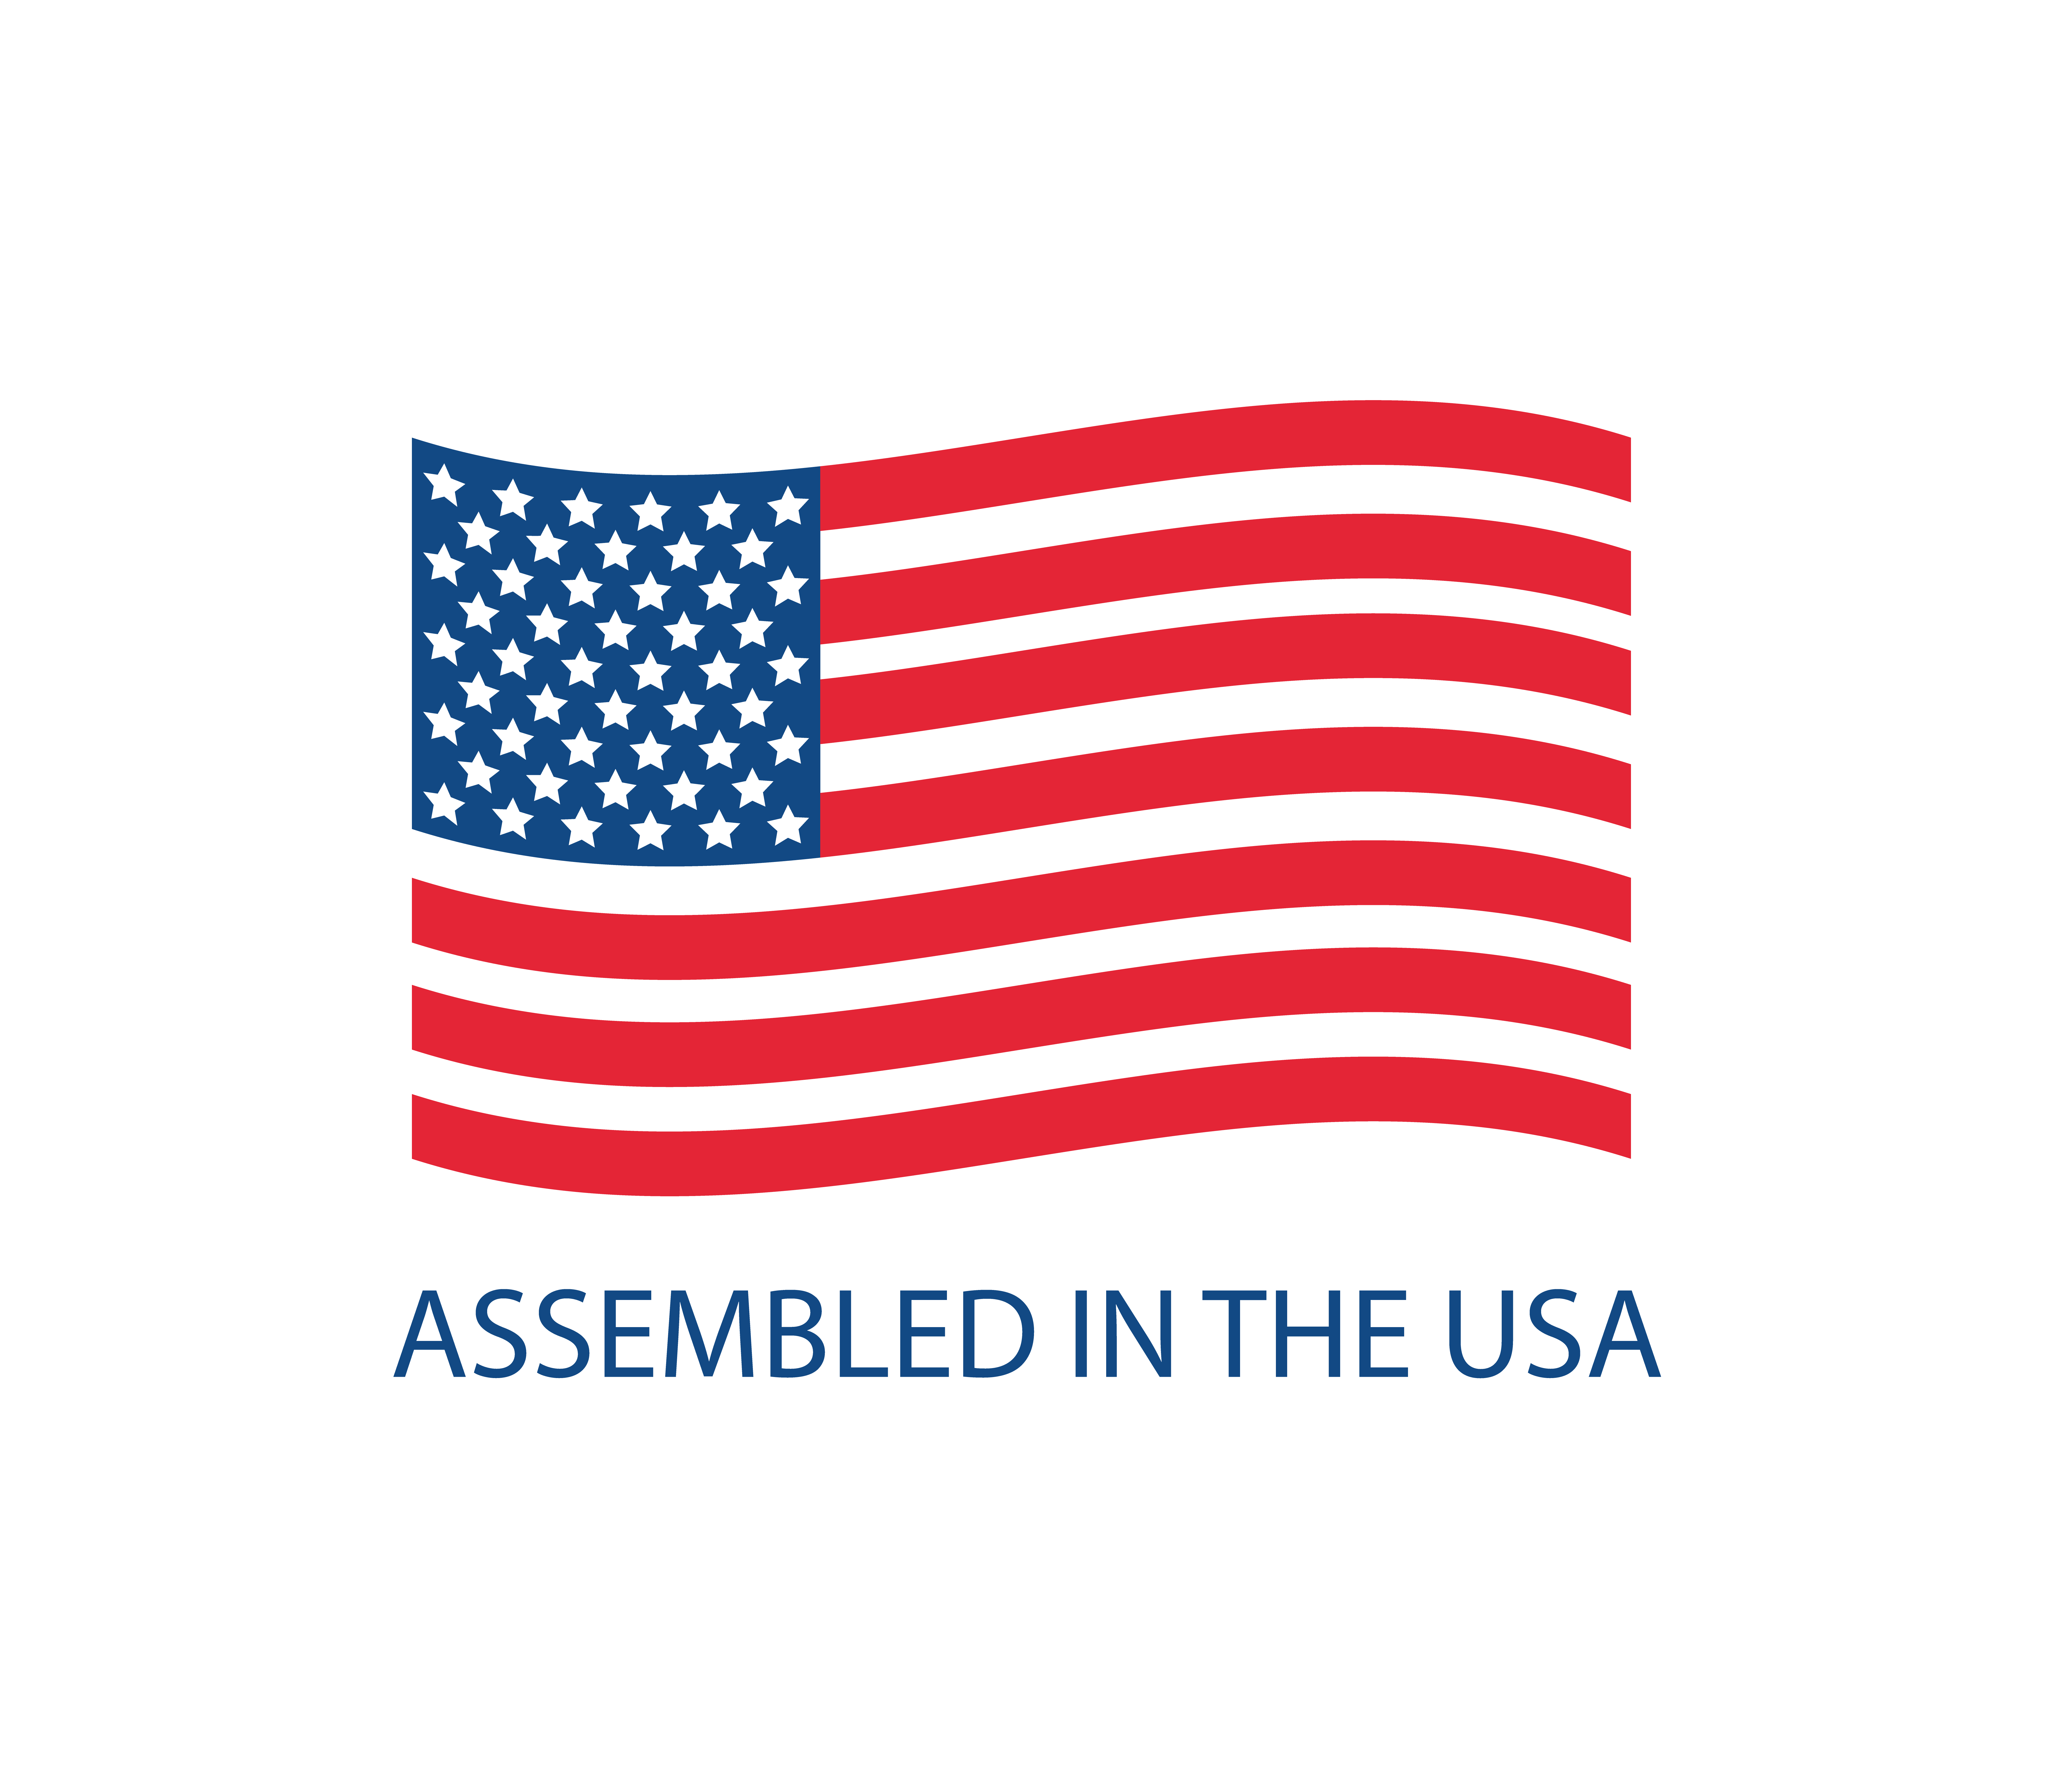 The Value Behind “Assembled in the USA”